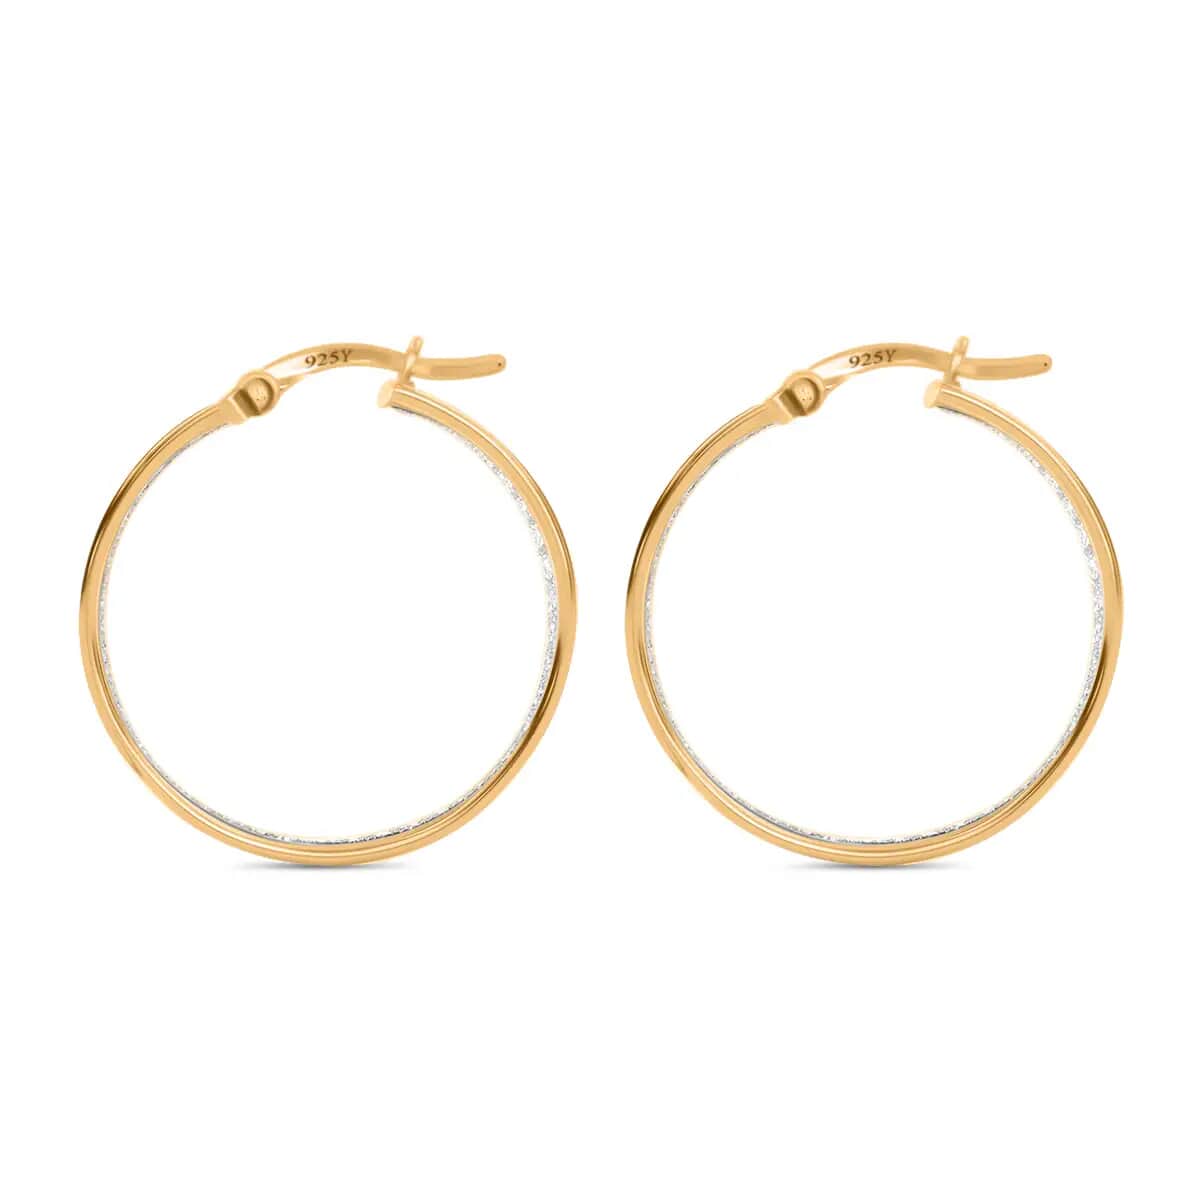 Sandblast Inside Out Hoop Earrings For Women, 14K Yellow Gold Plated Sterling Silver Hoop Earrings, Gifts For Her image number 3